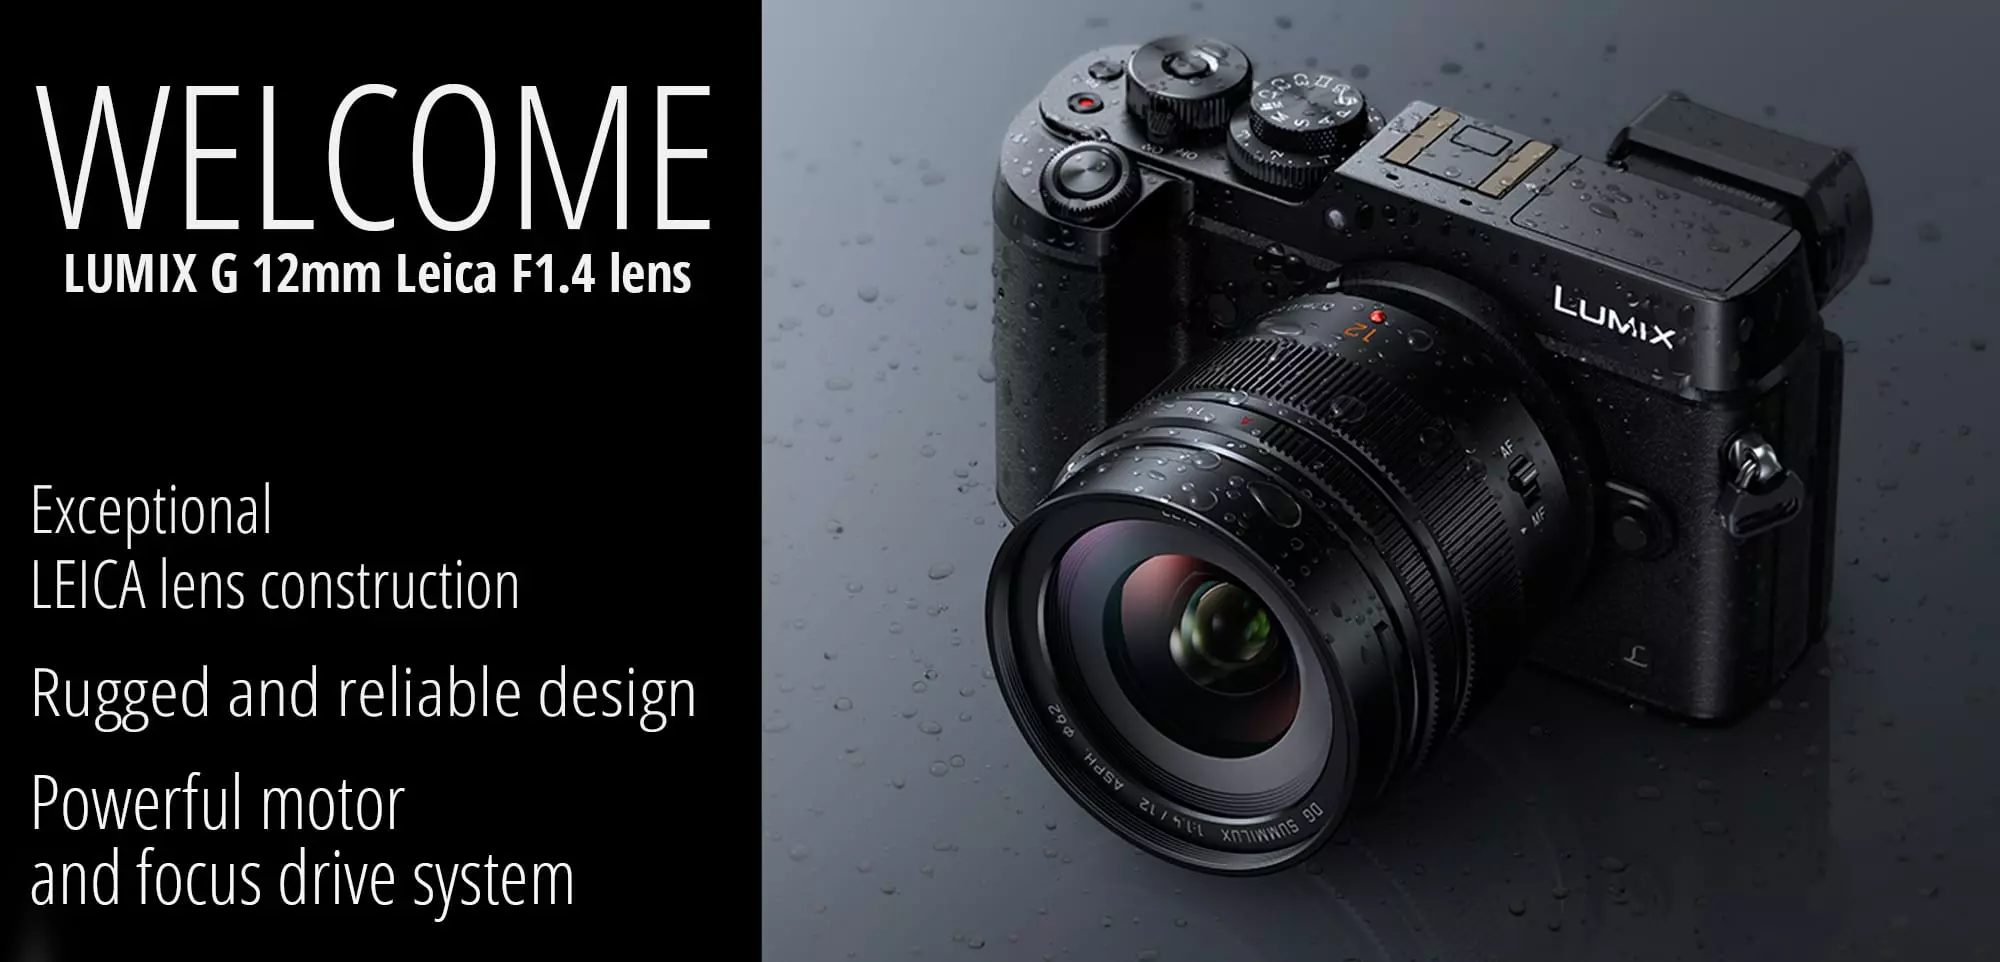 Superior performance and rugged good looks: LUMIX G 12mm Leica F1